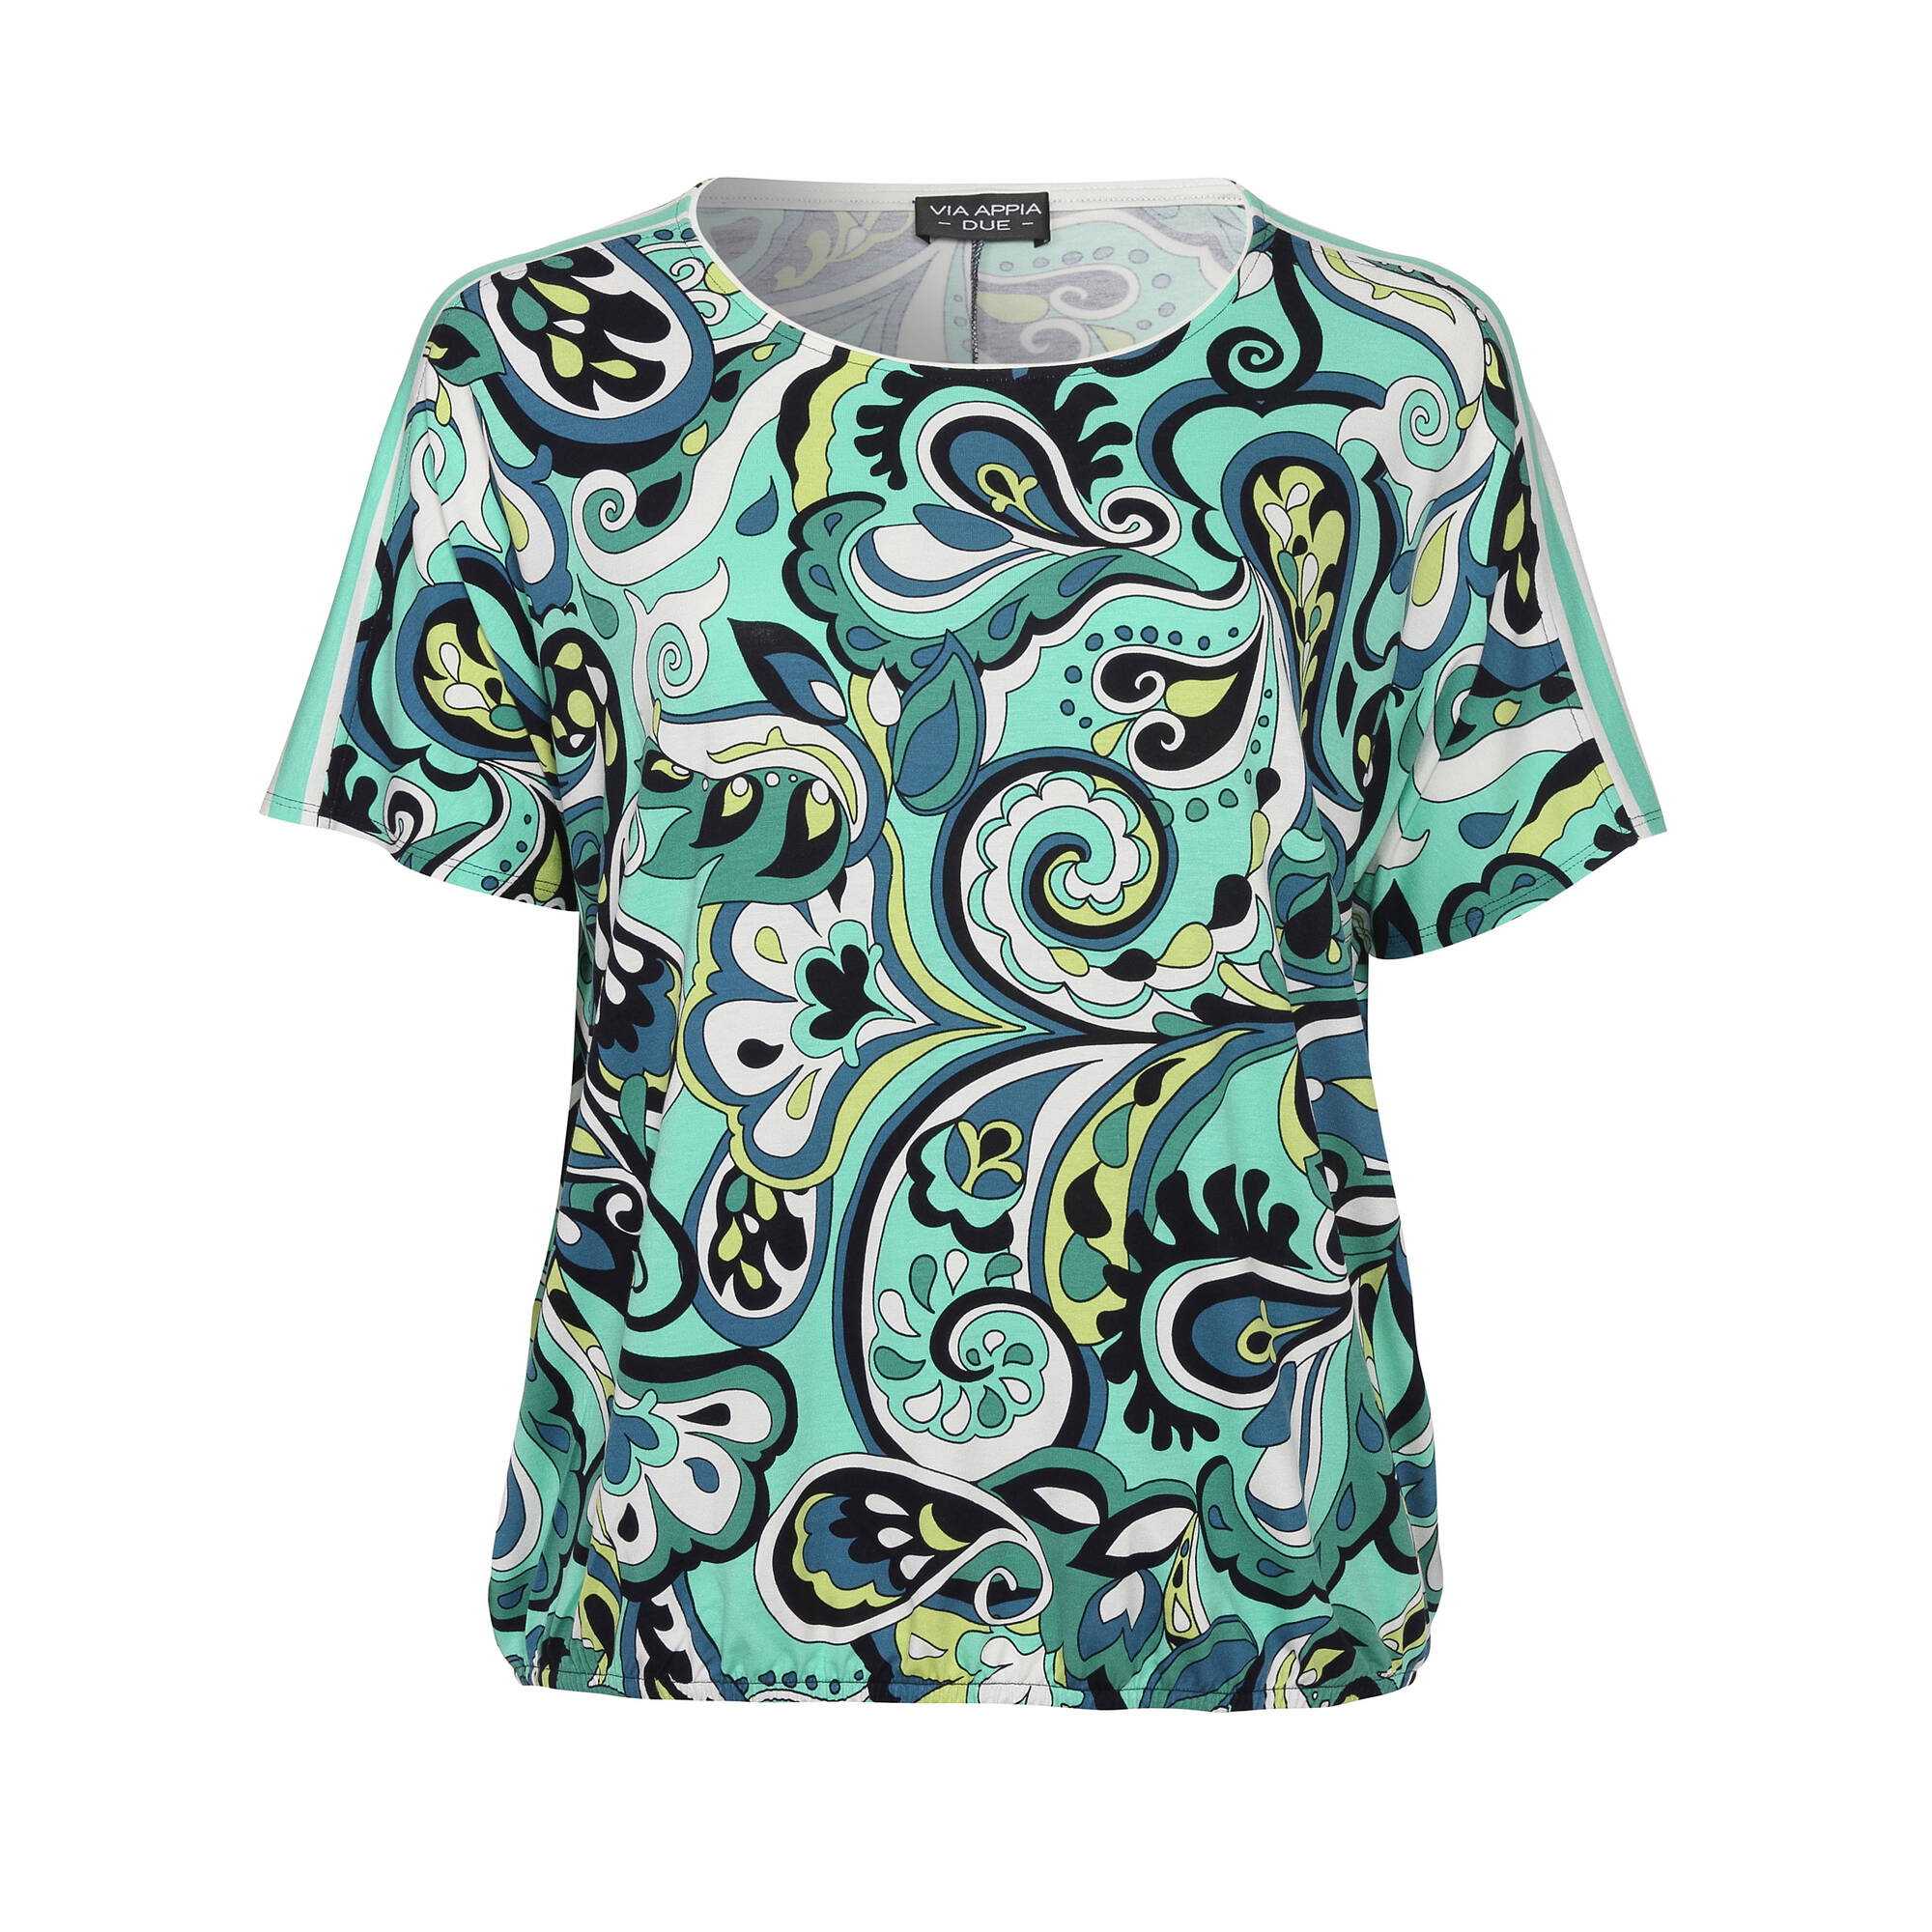 Extrovertiertes T-Shirt mit Paisley-Muster